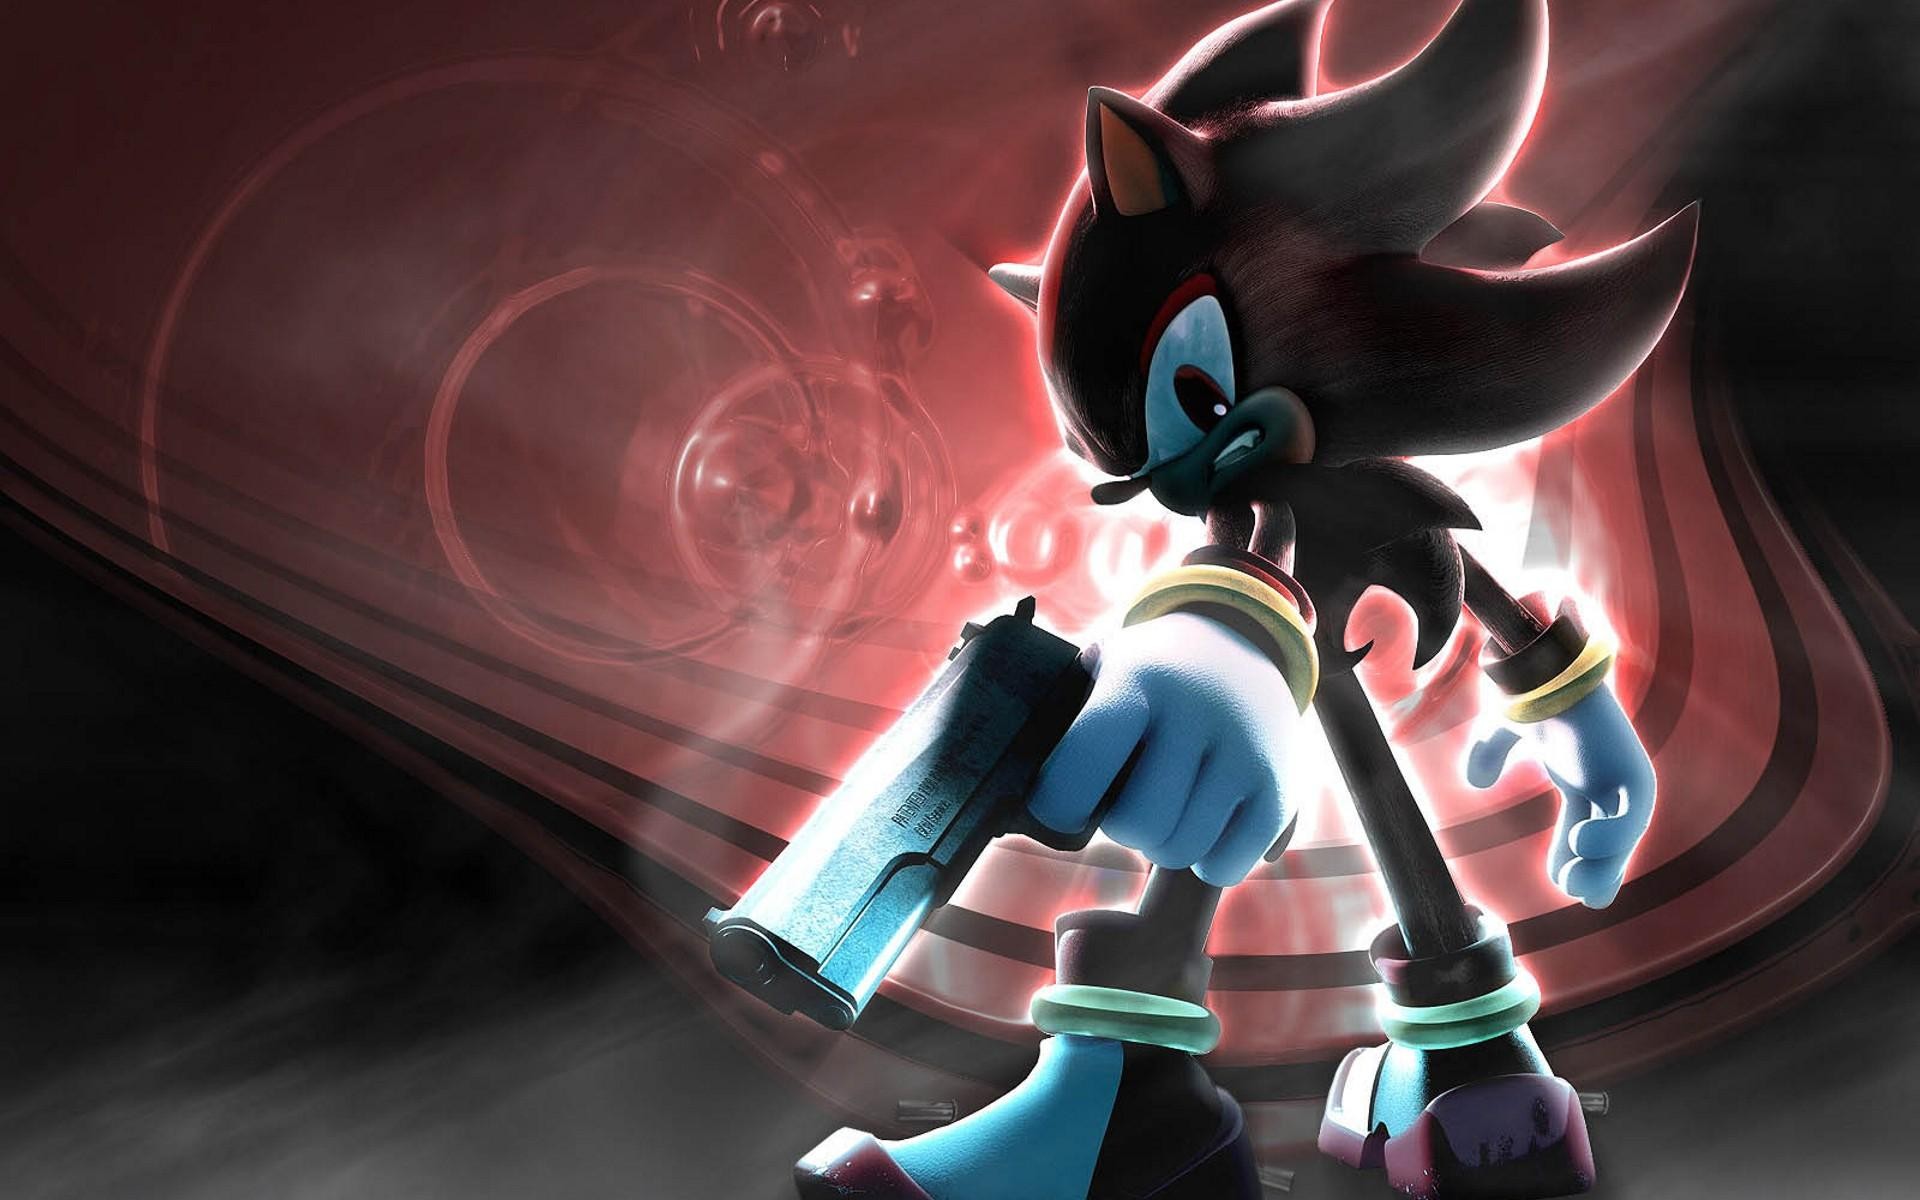 Video Game Shadow the Hedgehog HD Wallpaper | Background Image